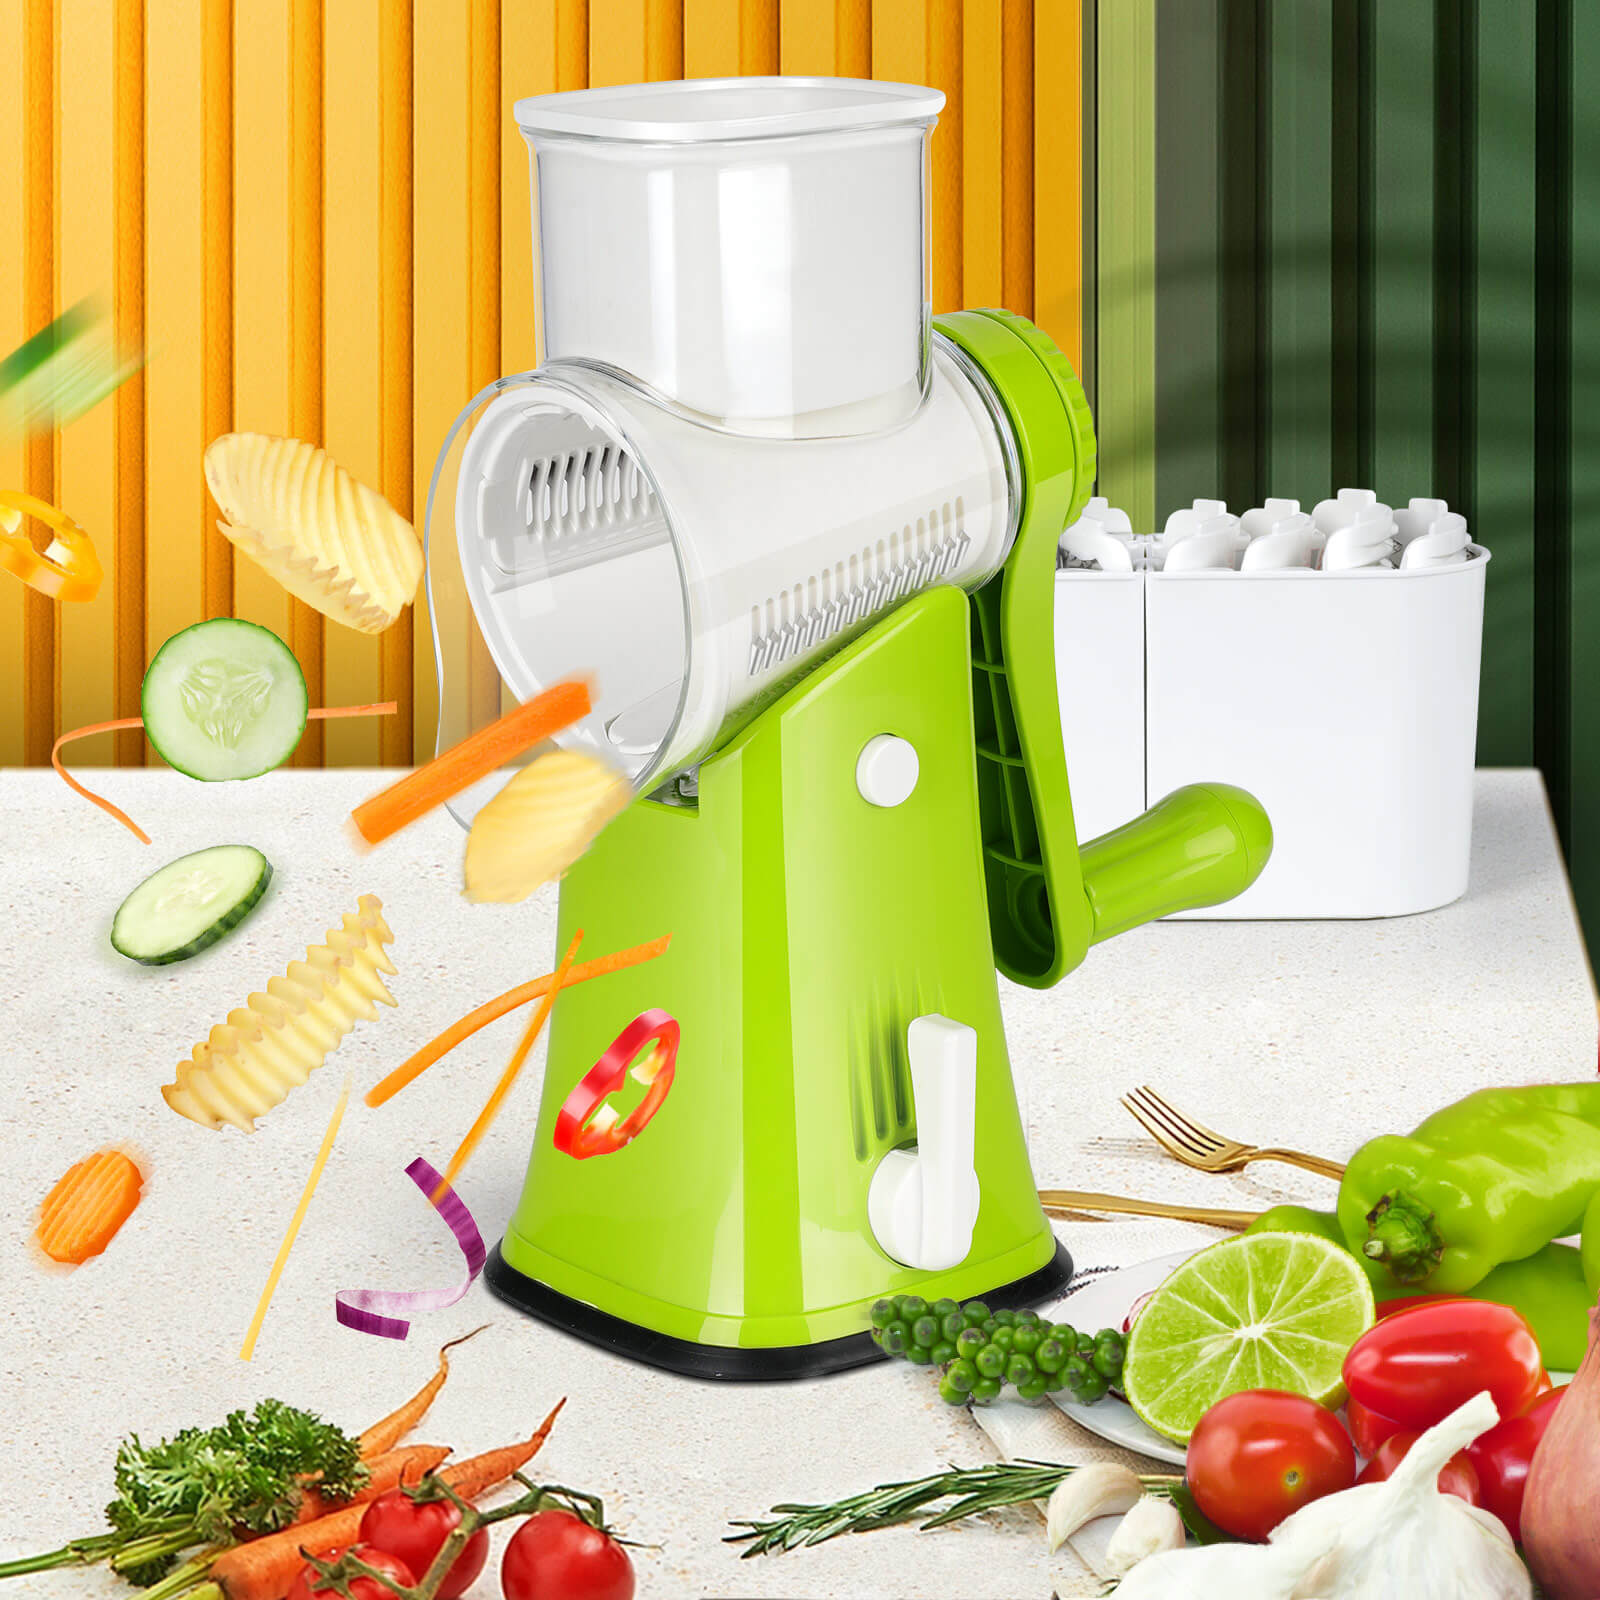 Masthome Rotary Cheese Grater Shredder with 5 Interchangeable Blades